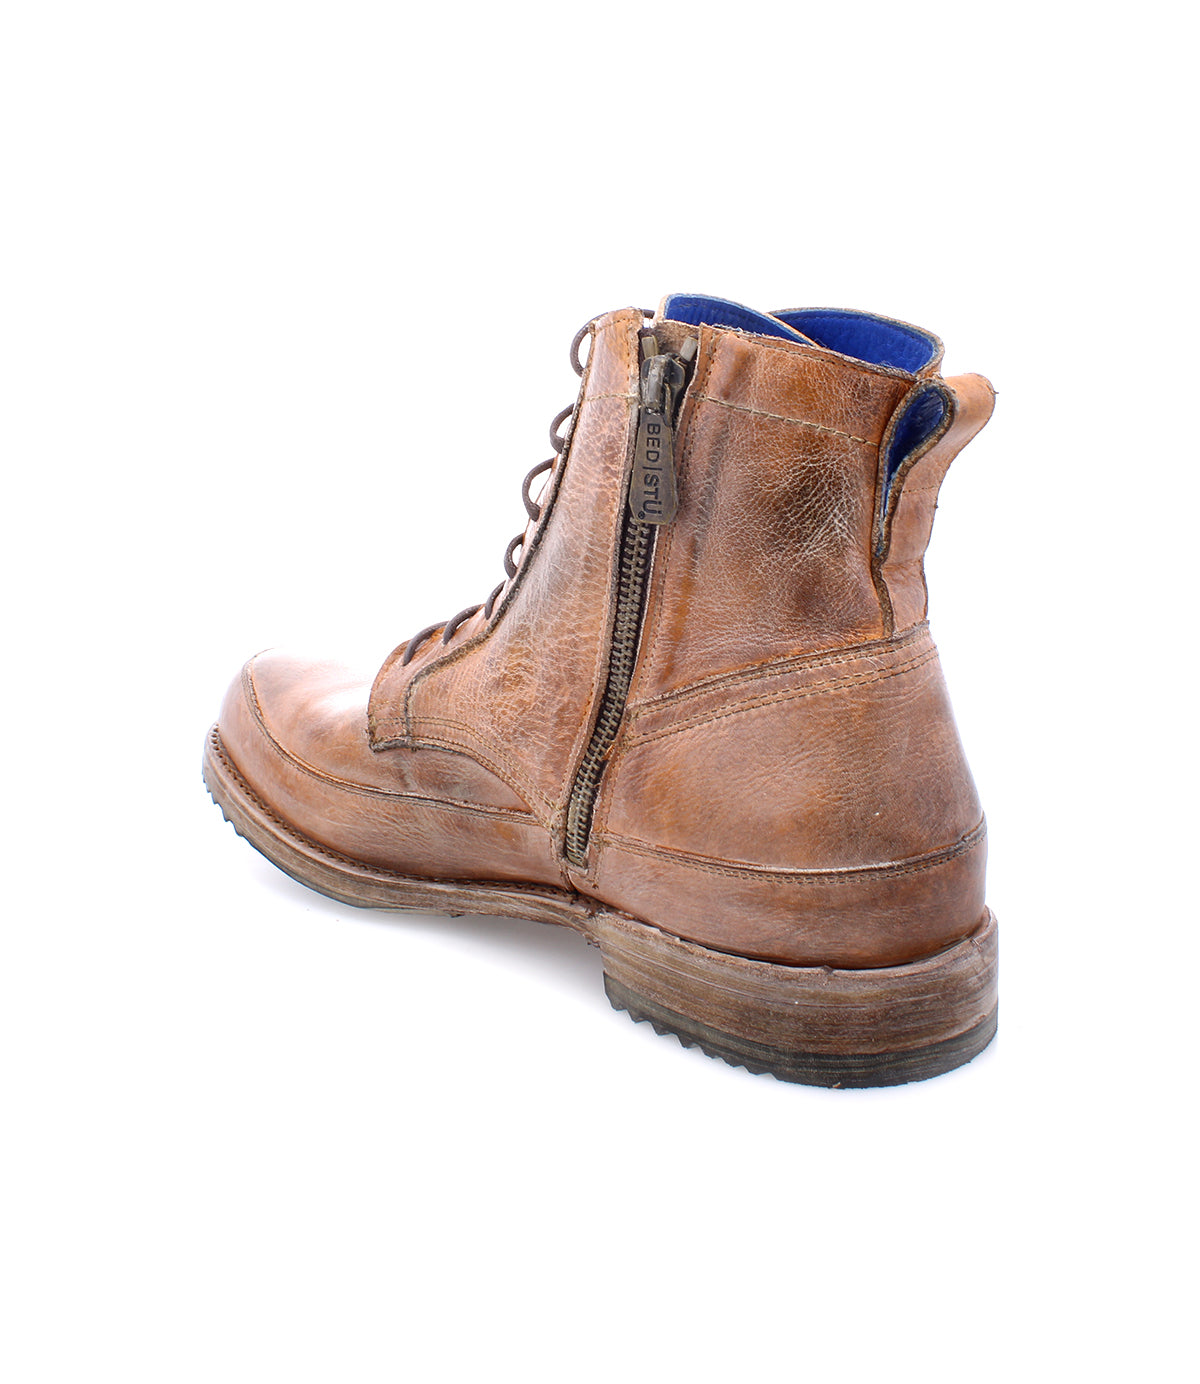 A pair of worn brown leather Bed Stu Spiker lace-up ankle boots with zippers, isolated on a white background.